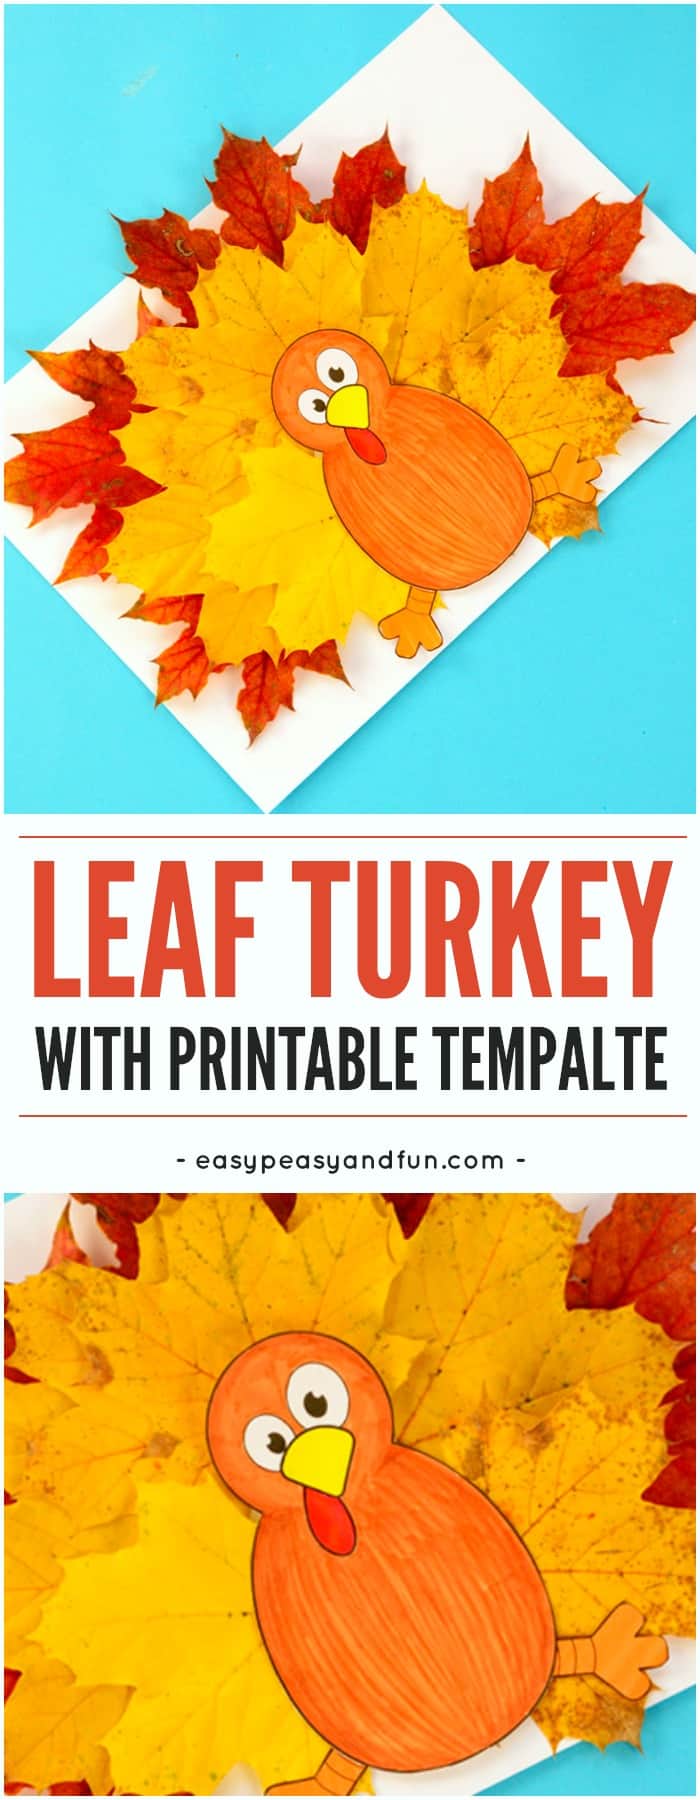 Turkey leaf craft for kids with template. Fun Fall craft project for kids to make at home or classroom.